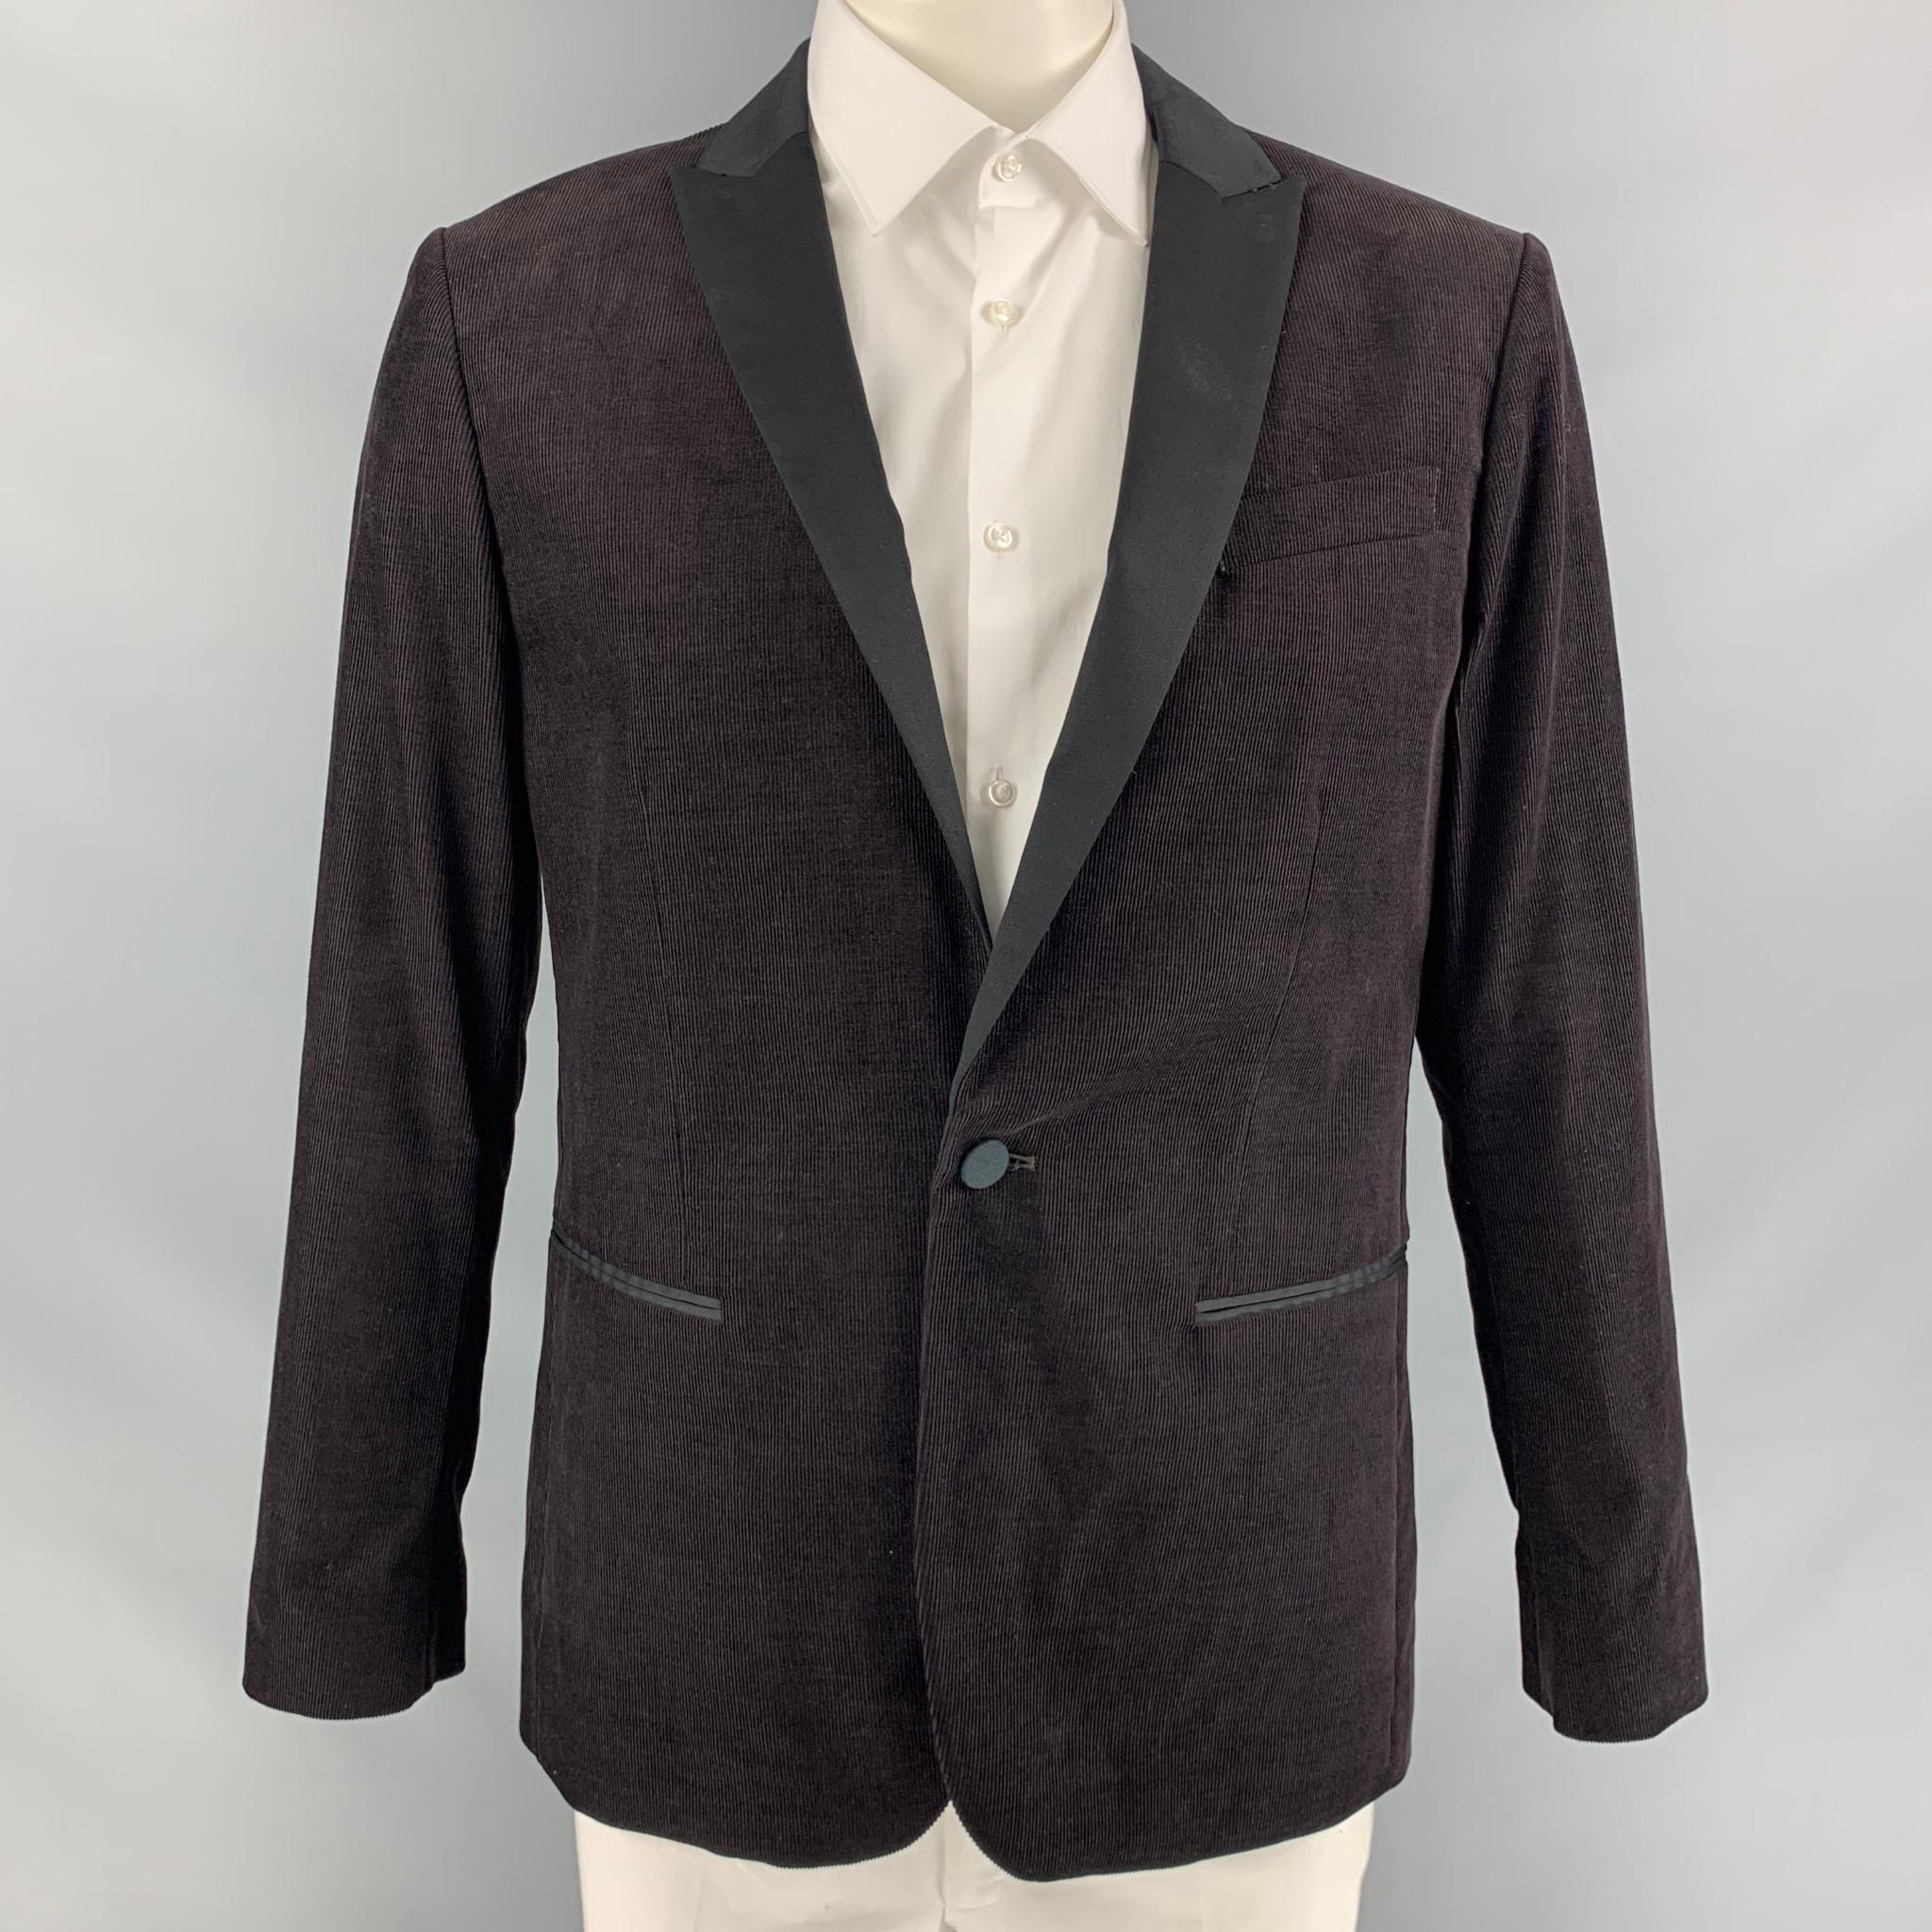 JOHN VARVATOS * U.S.A. luxe sport coat comes in brown and black cotton corduroy fabric featuring a one button closure, two slit pockets and peak lapel.

Excellent Pre-Owned Condition.
Marked: 42

Measurements:

Shoulder: 19 in
Chest: 44 in
Sleeve: